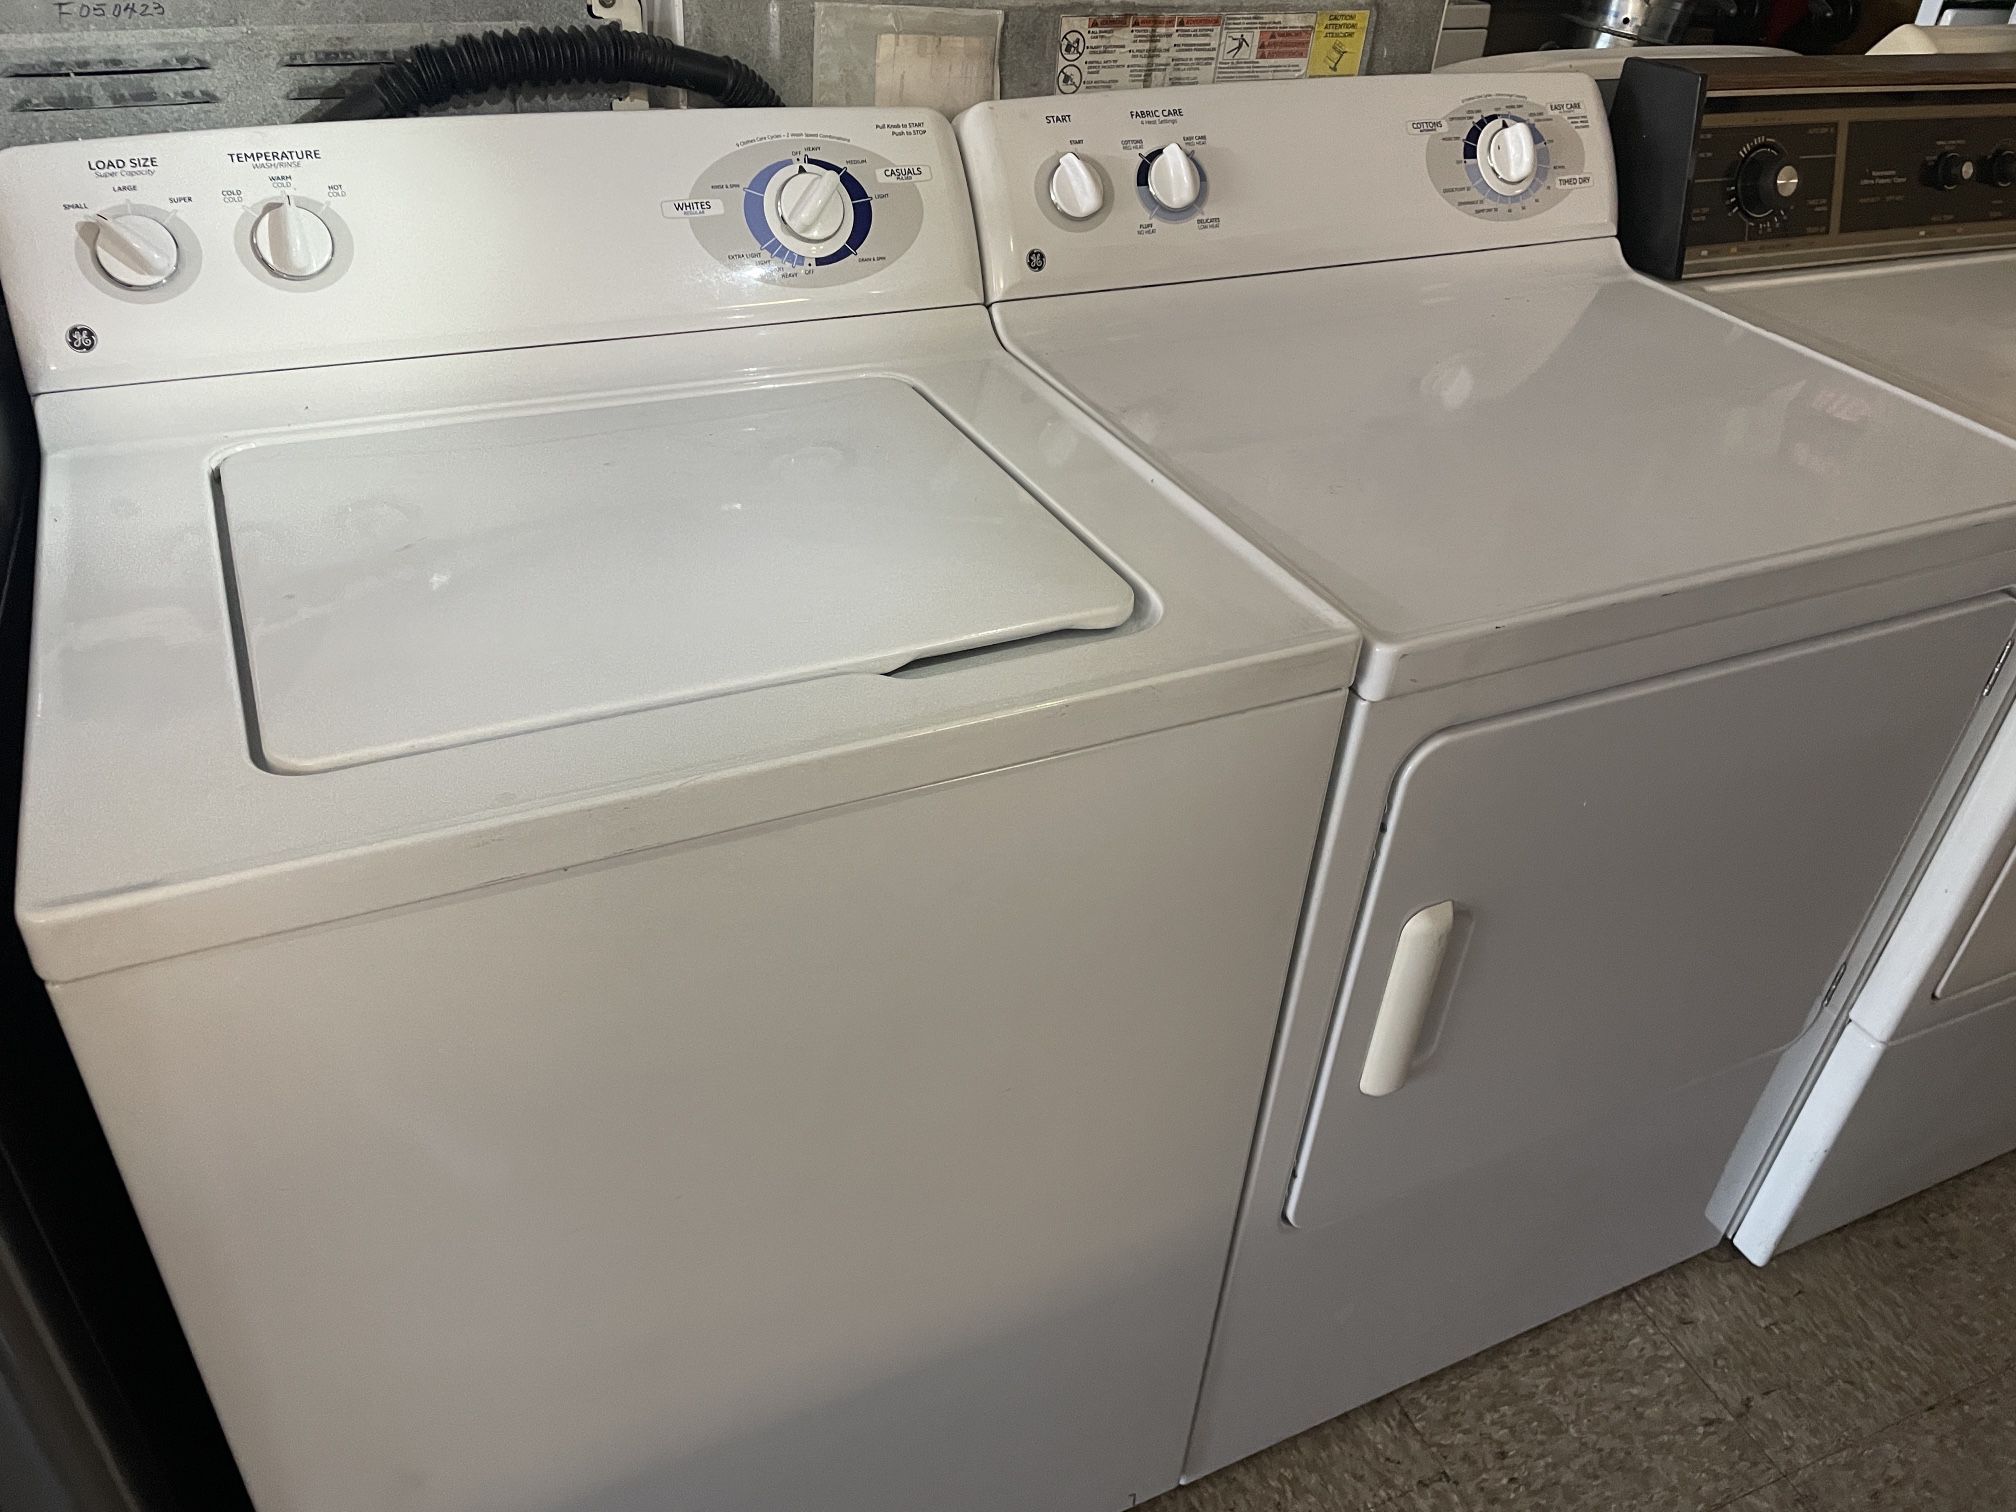 Washer & Dryer Set (White)  - General Electric 